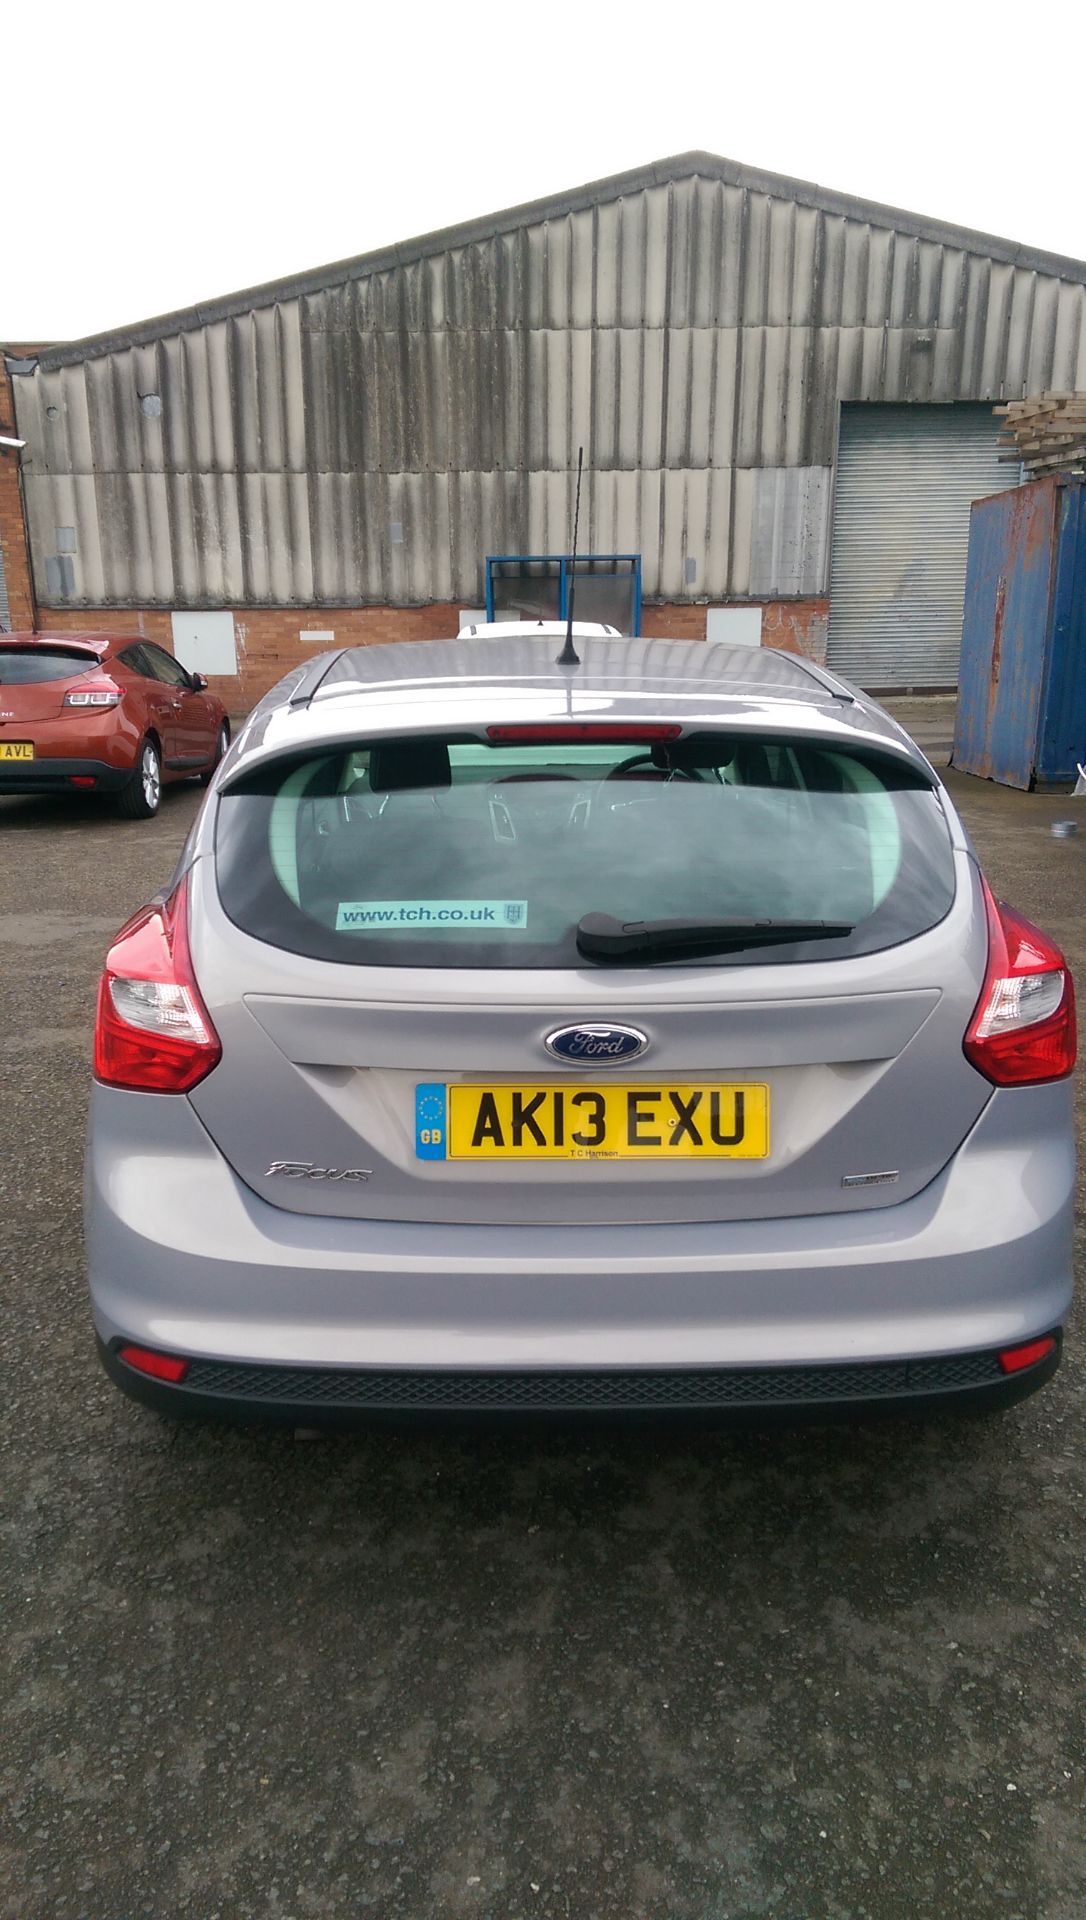 Ford Focus 1.0T Eco Boost Edge AK13 EXU 46k miles - Image 4 of 6